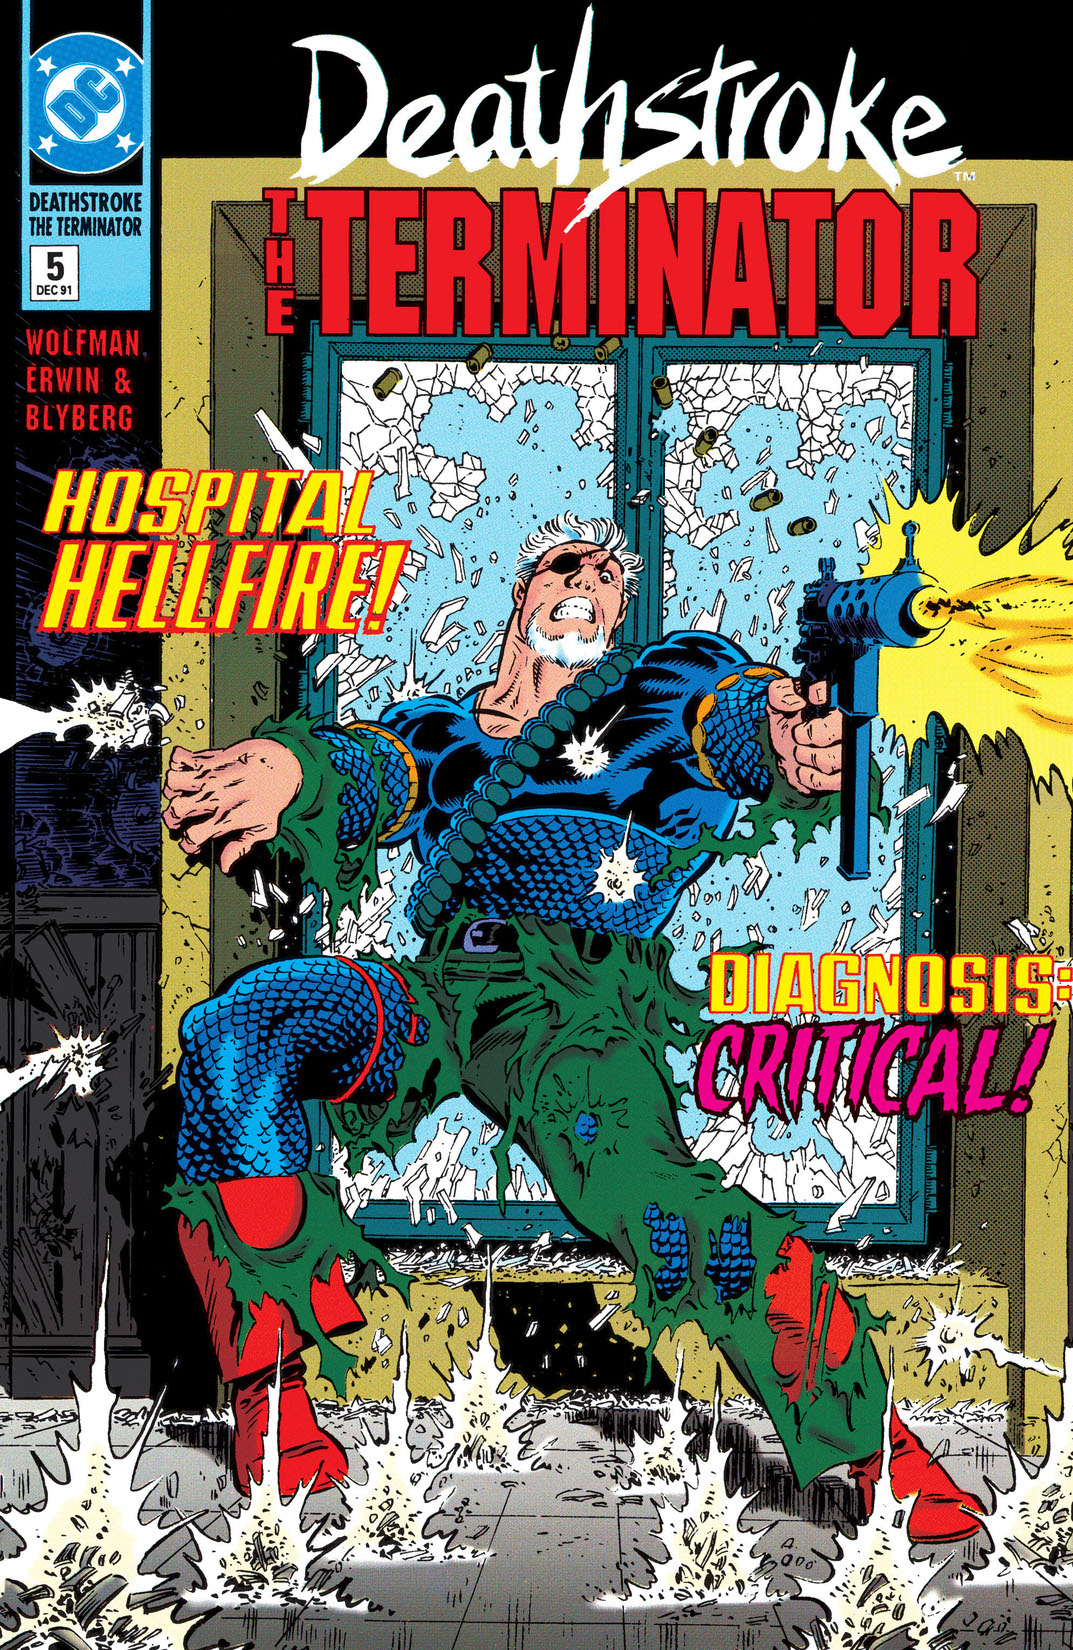 Deathstroke (1991-) #5 preview images